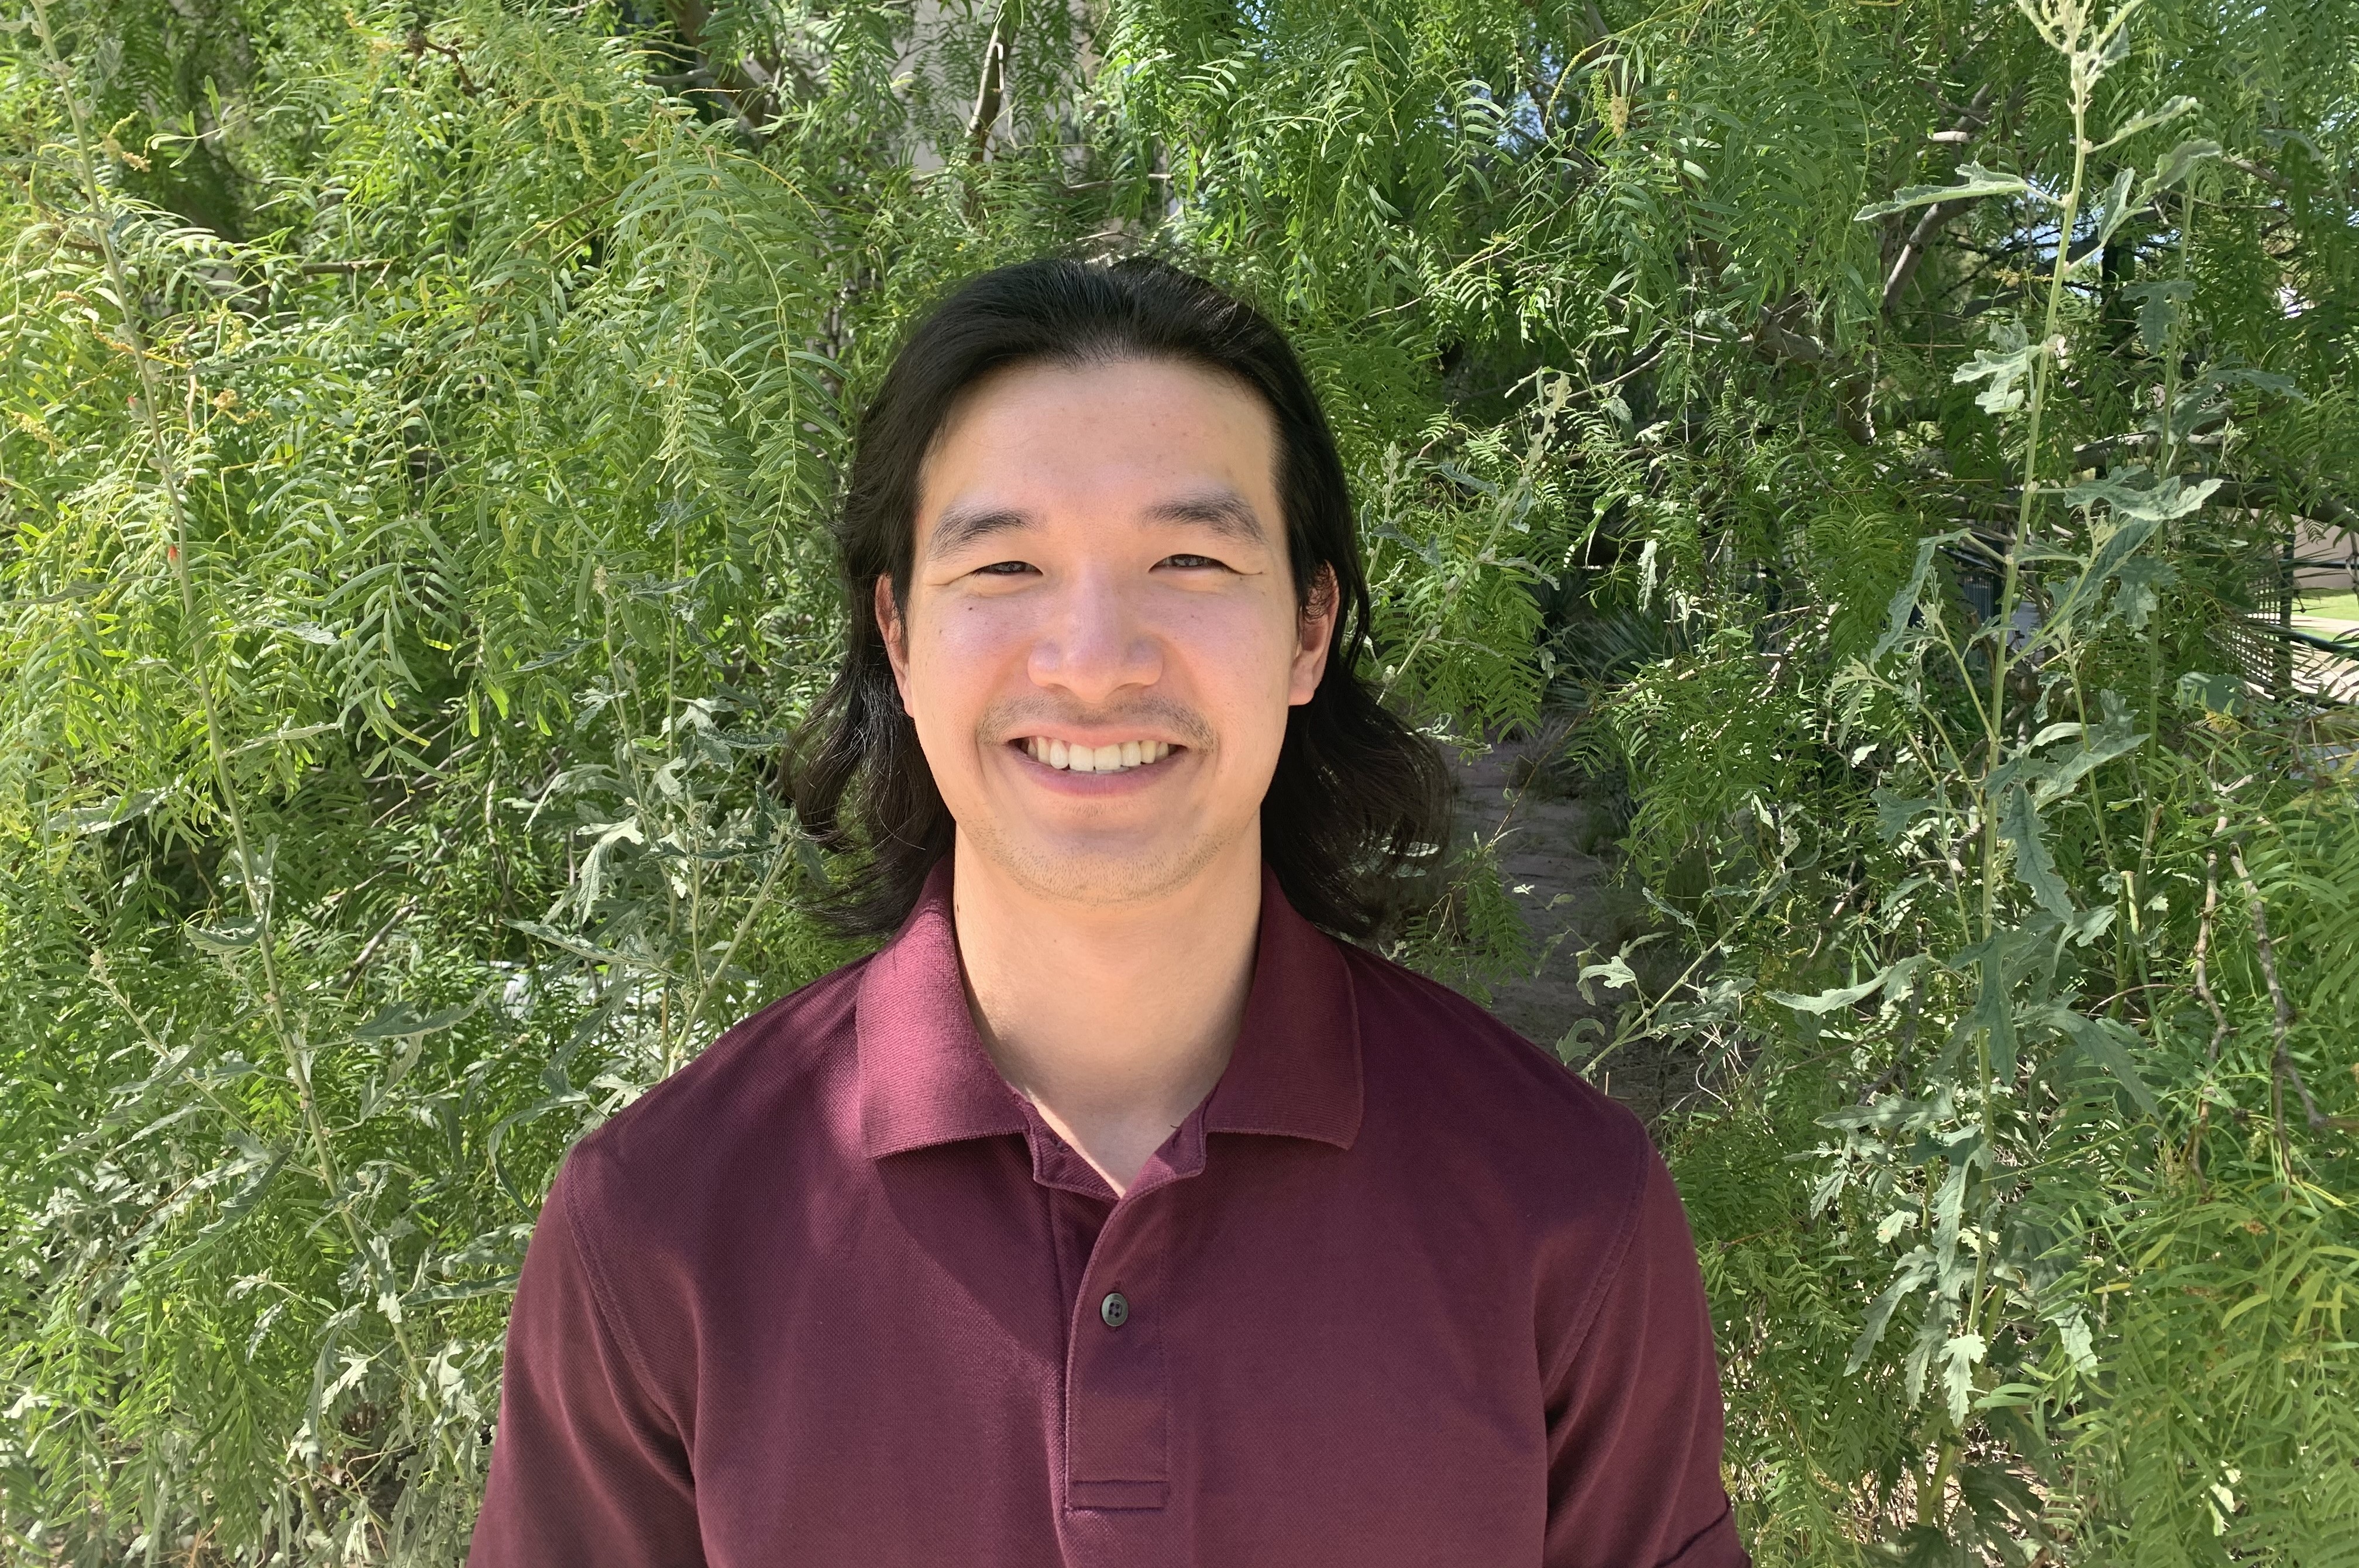 Lawrence Zhou wearing a crimson shirt, smiling in front of green leaves.